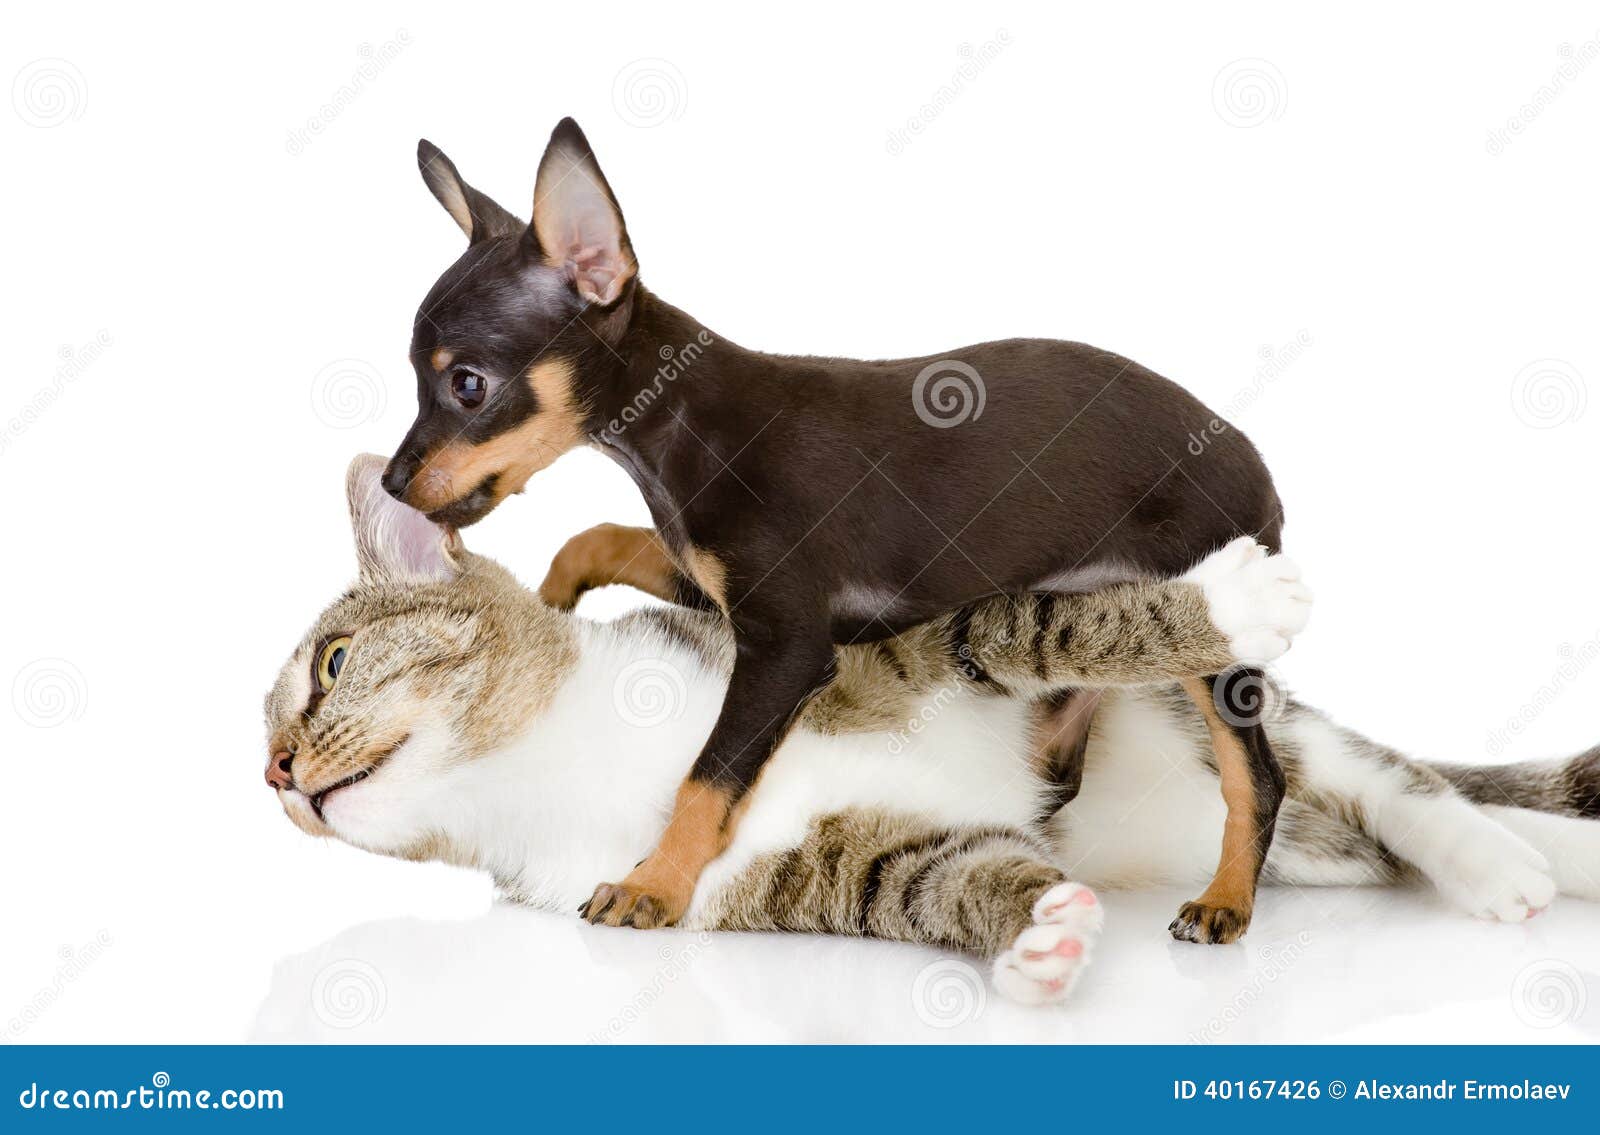 the cat fights with a dog